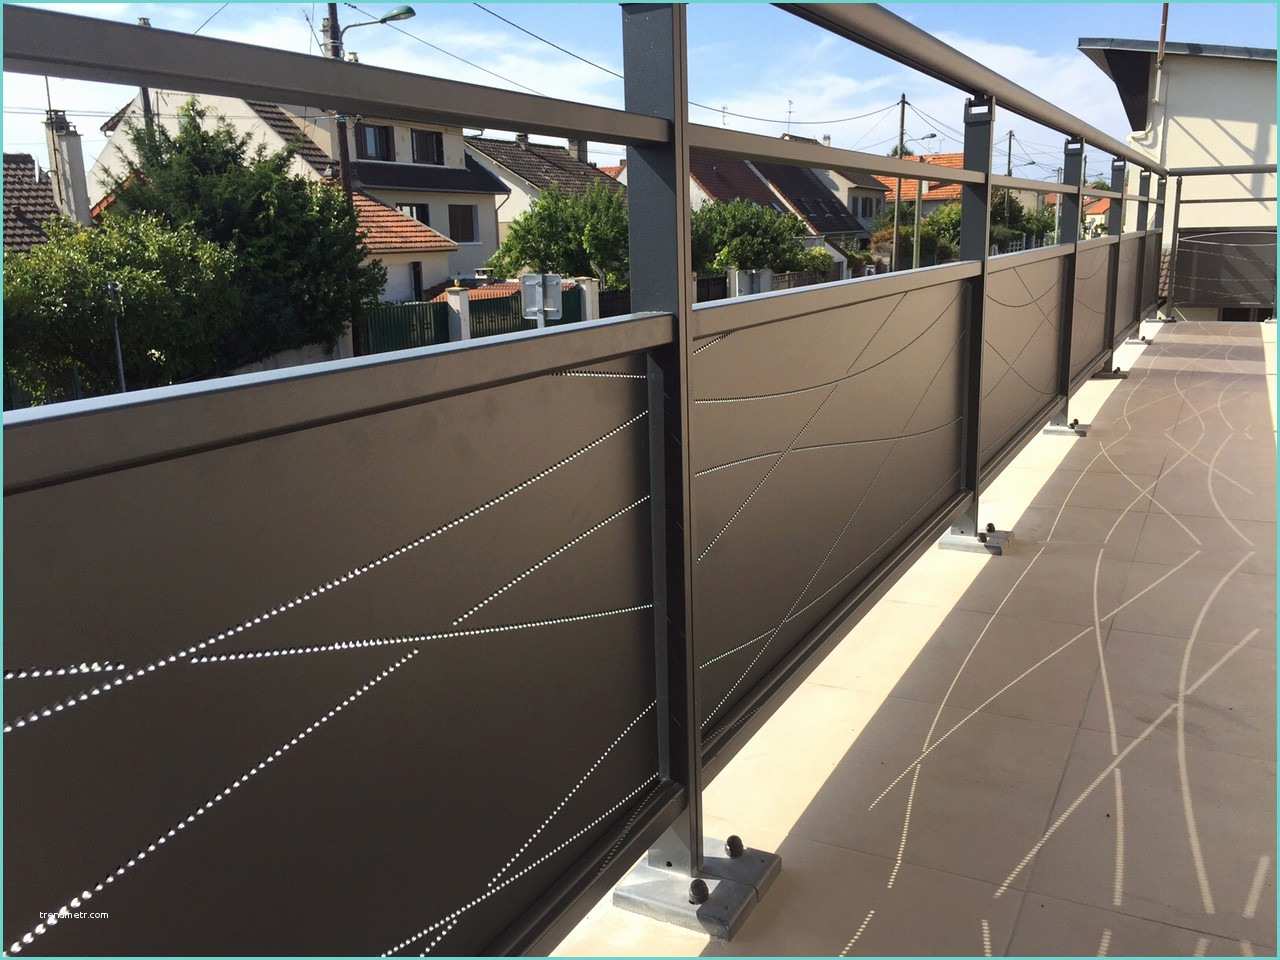 Garde Corps Pour Terrasse Pas Cher 41 Rambarde Terrasse Pas Cher Idees